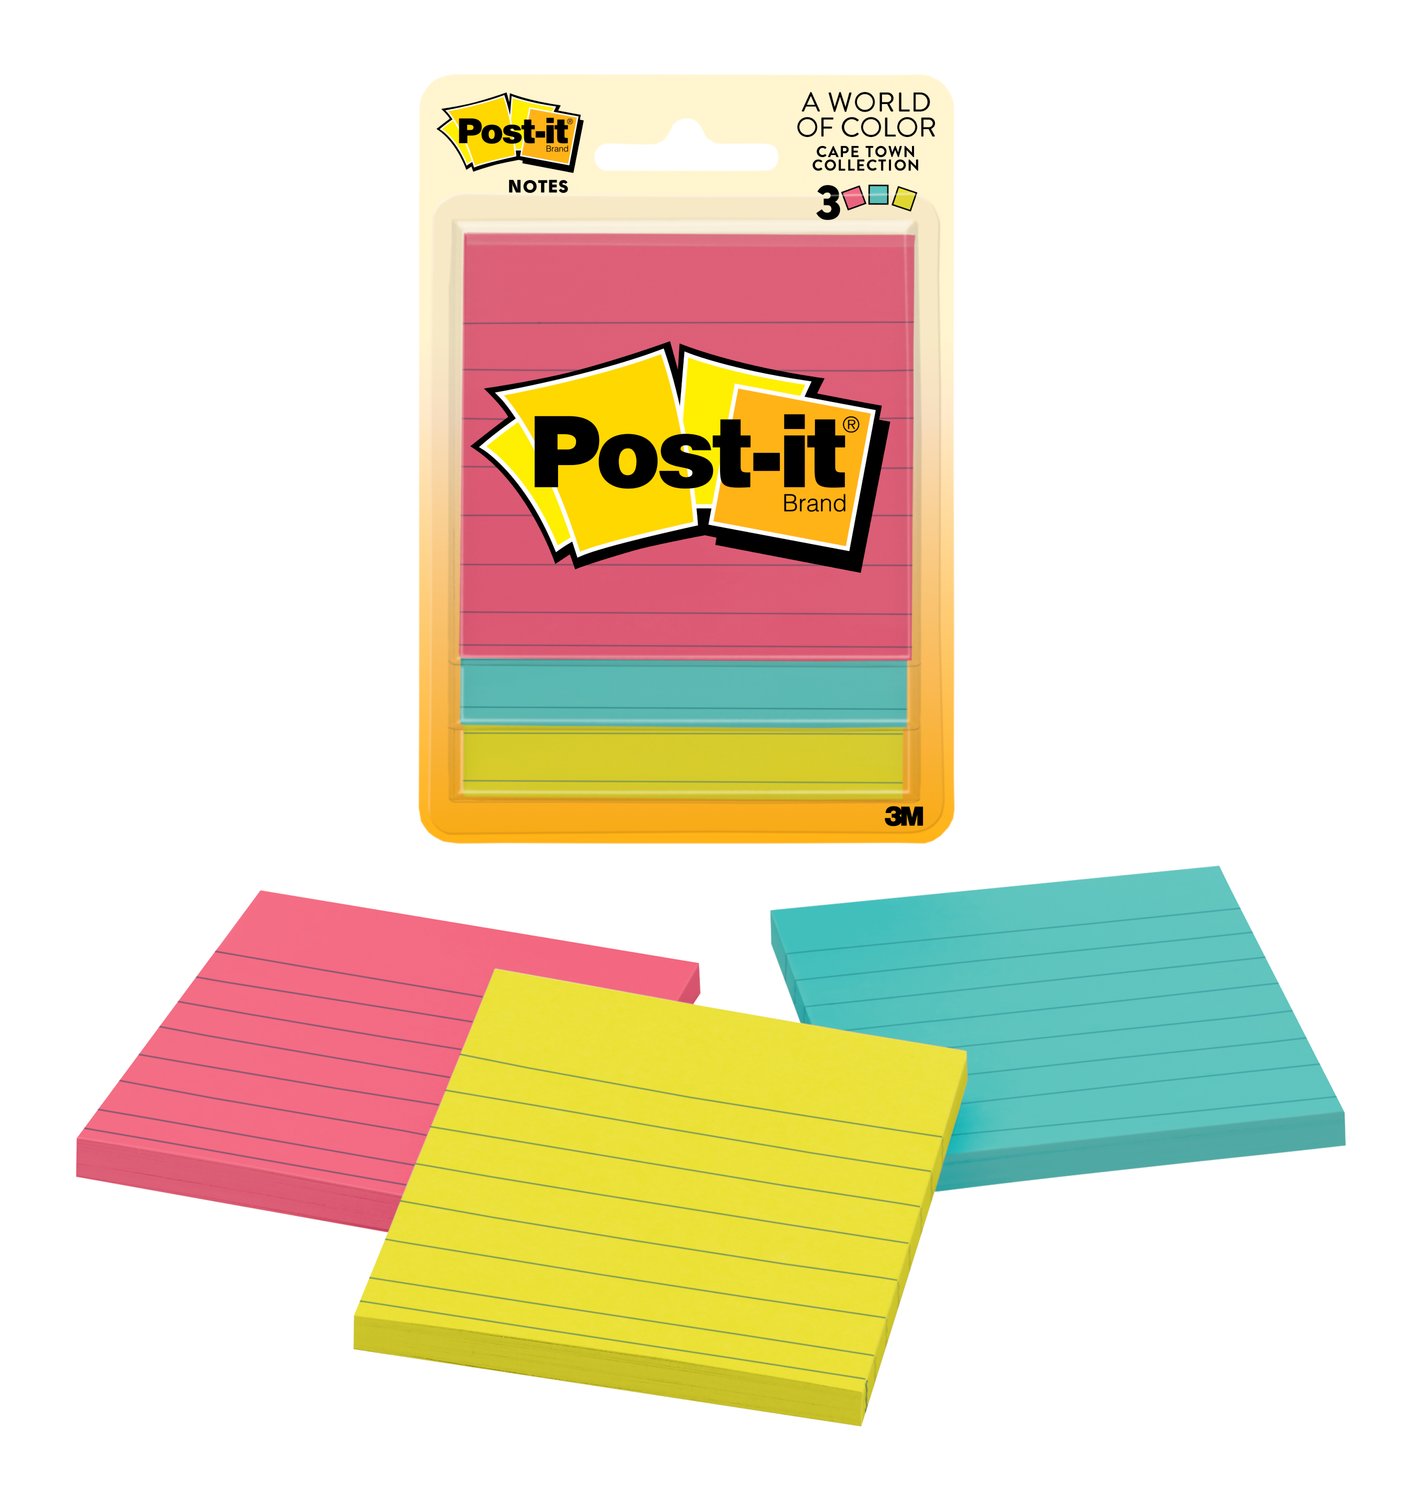 7100149181 - Post-it Notes, 6301-17, 3 in x 3 in (76 mm x 76 mm), 3 pack of 50
sheets